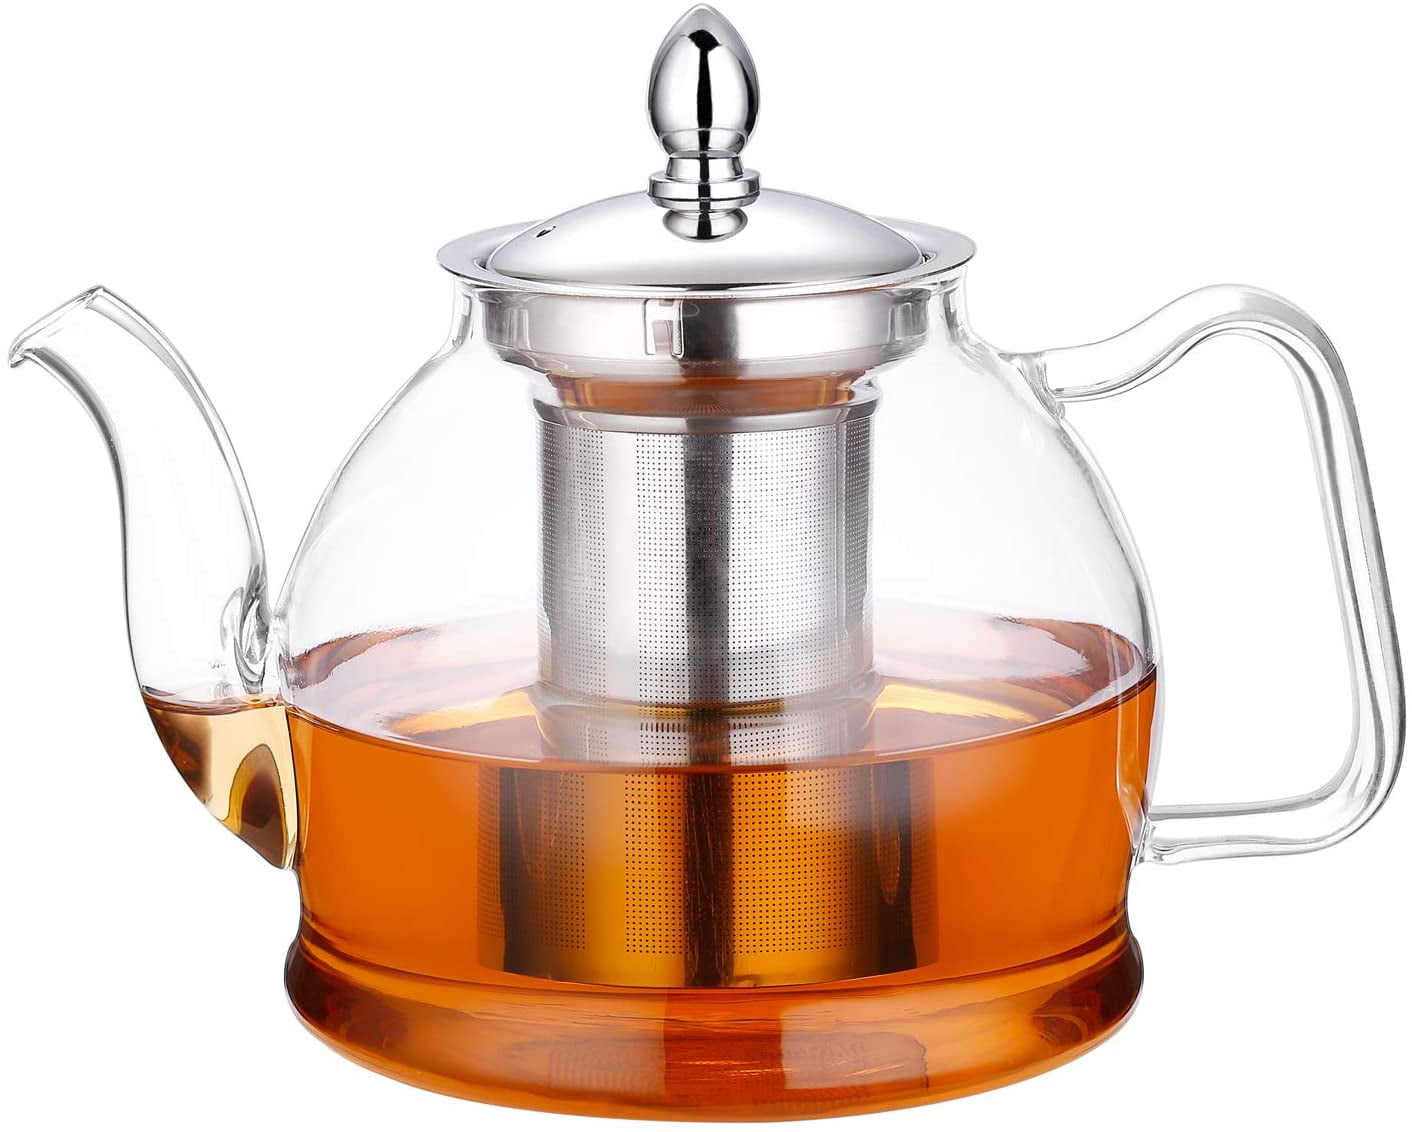 Glass Teapot Heat Resistant with Infuser For Blooming tea 1000ml 35oz 